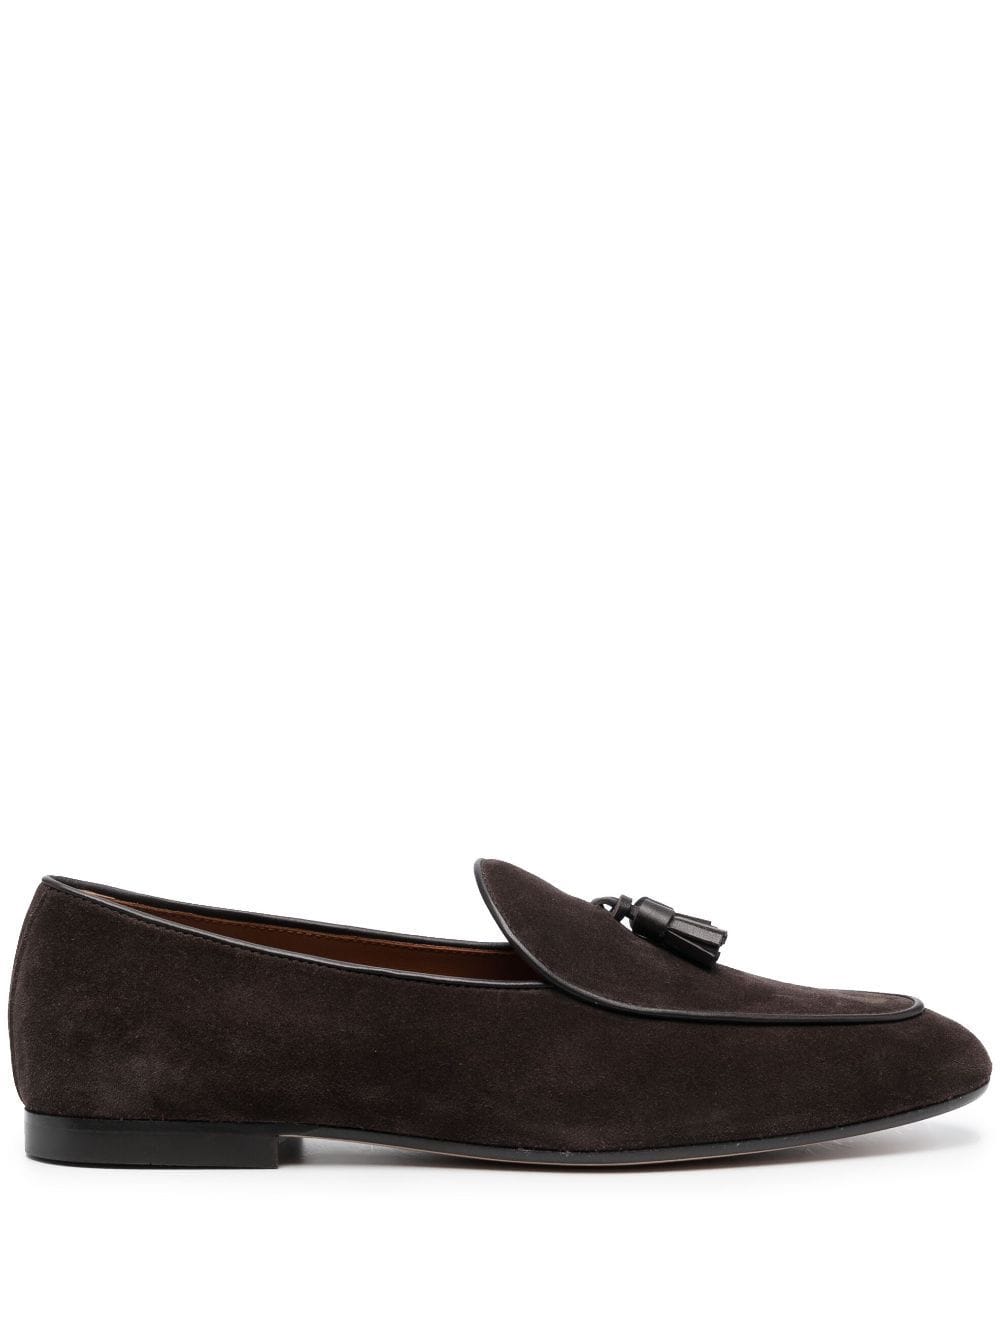 TOD'S TASSEL-DETAIL SUEDE LOAFERS